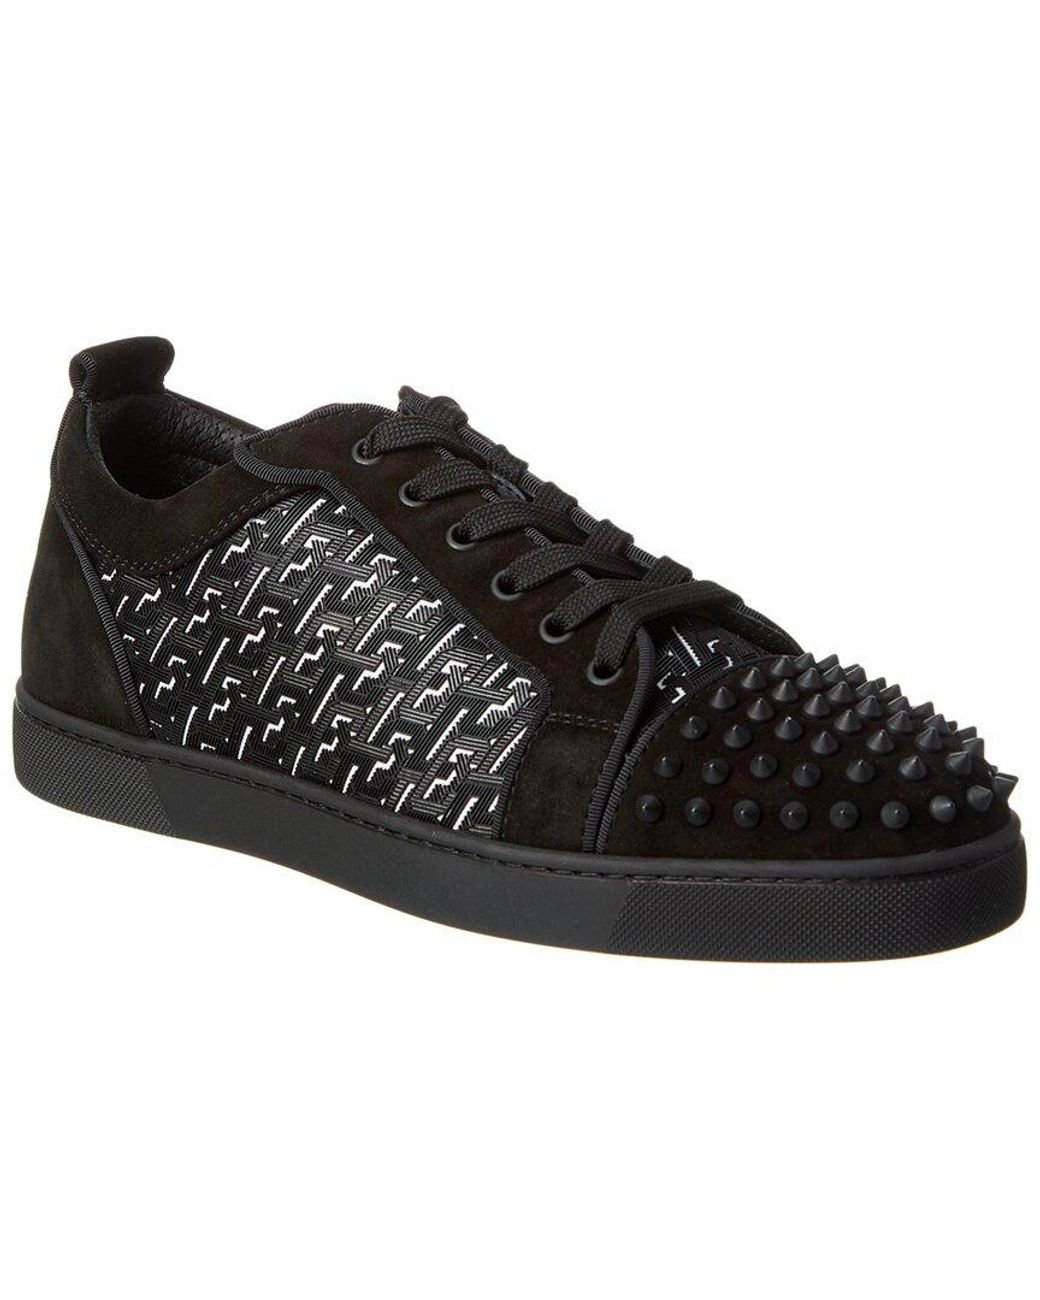 Christian Louboutin Rantulow Rubber-Trimmed Mesh and Suede Sneakers - Men - Black Suede Shoes - EU 44.5